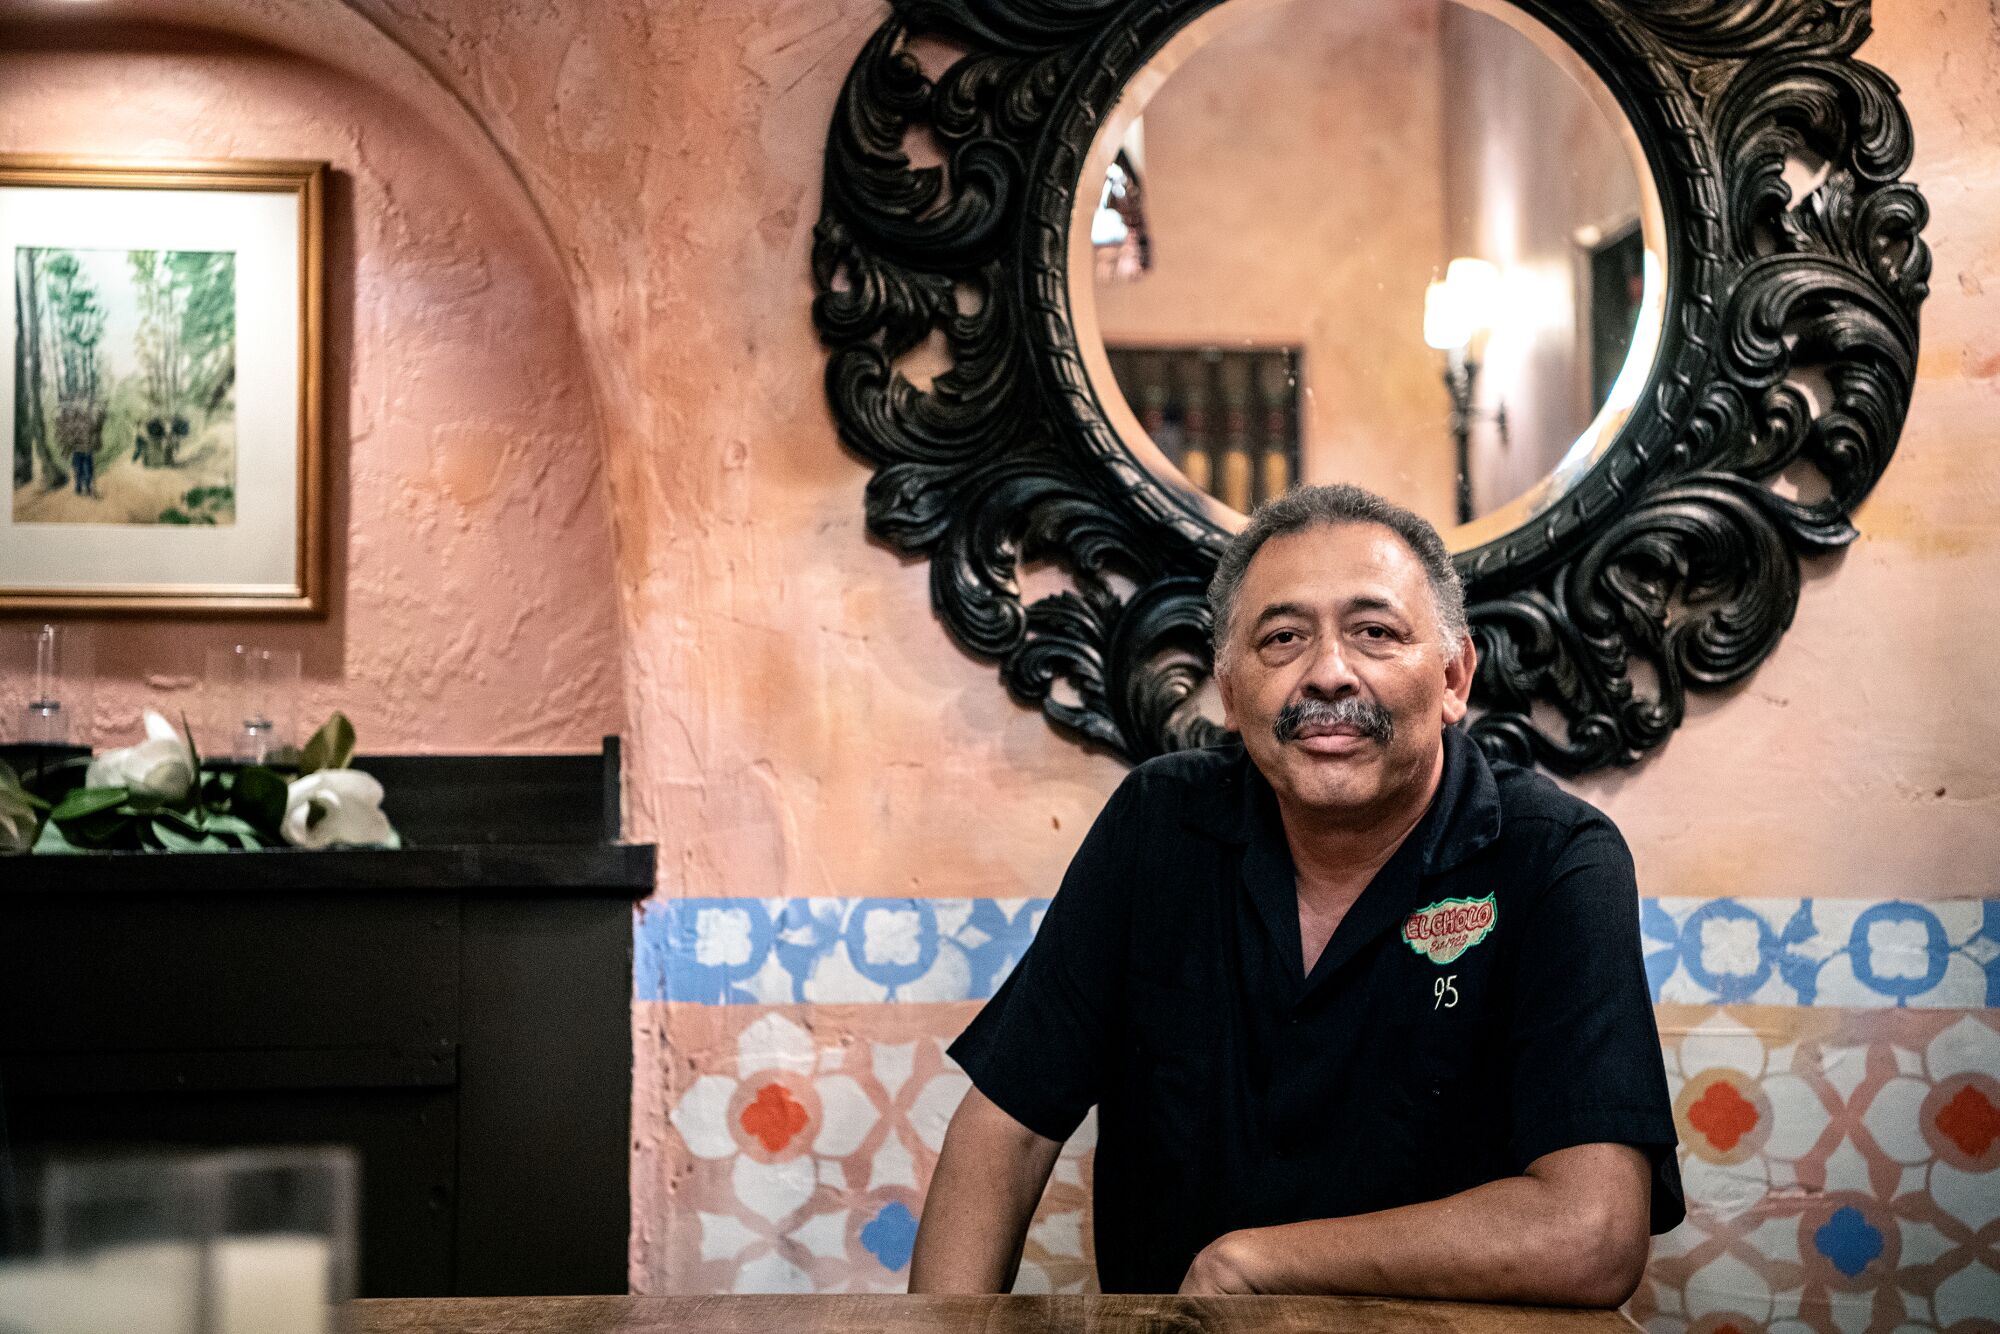 Jaime Cornelio sitting at a table, with a circular mirror on the wall behind him.